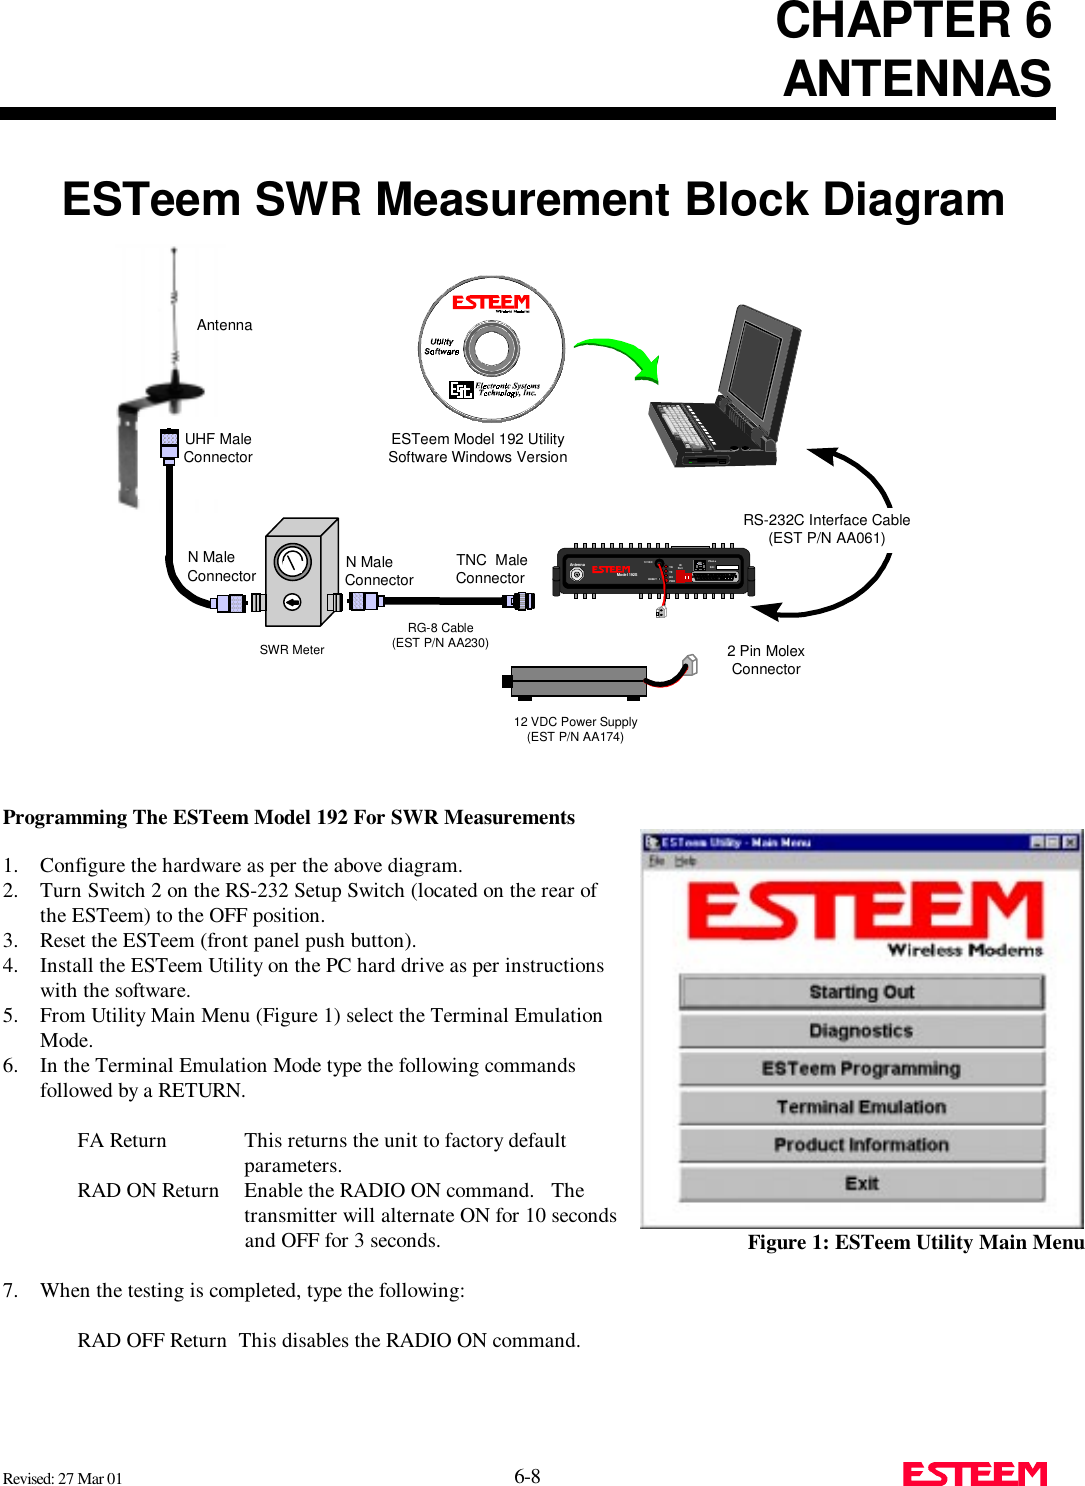 CHAPTER 6ANTENNASRevised: 27 Mar 01 6-8 ESTeem SWR Measurement Block DiagramProgramming The ESTeem Model 192 For SWR Measurements1. Configure the hardware as per the above diagram.2. Turn Switch 2 on the RS-232 Setup Switch (located on the rear ofthe ESTeem) to the OFF position.3. Reset the ESTeem (front panel push button).4. Install the ESTeem Utility on the PC hard drive as per instructionswith the software.5. From Utility Main Menu (Figure 1) select the Terminal EmulationMode.6. In the Terminal Emulation Mode type the following commandsfollowed by a RETURN.         FA Return    This returns the unit to factory default   parameters.RAD ON Return    Enable the RADIO ON command.   The   transmitter will alternate ON for 10 seconds                                            and OFF for 3 seconds.7. When the testing is completed, type the following:        RAD OFF Return  This disables the RADIO ON command.N MaleConnector N MaleConnectorTNC  MaleConnectorAntenna2 Pin MolexConnectorRS-232C Interface Cable(EST P/N AA061)UHF MaleConnectorSWR MeterRG-8 Cable(EST P/N AA230)12 VDC Power Supply(EST P/N AA174)S/N:T/ETXRXPWRIRPortPhoneModel  192SAntenna 12 VD CRESE TESTeem Model 192 UtilitySoftware Windows VersionFigure 1: ESTeem Utility Main Menu